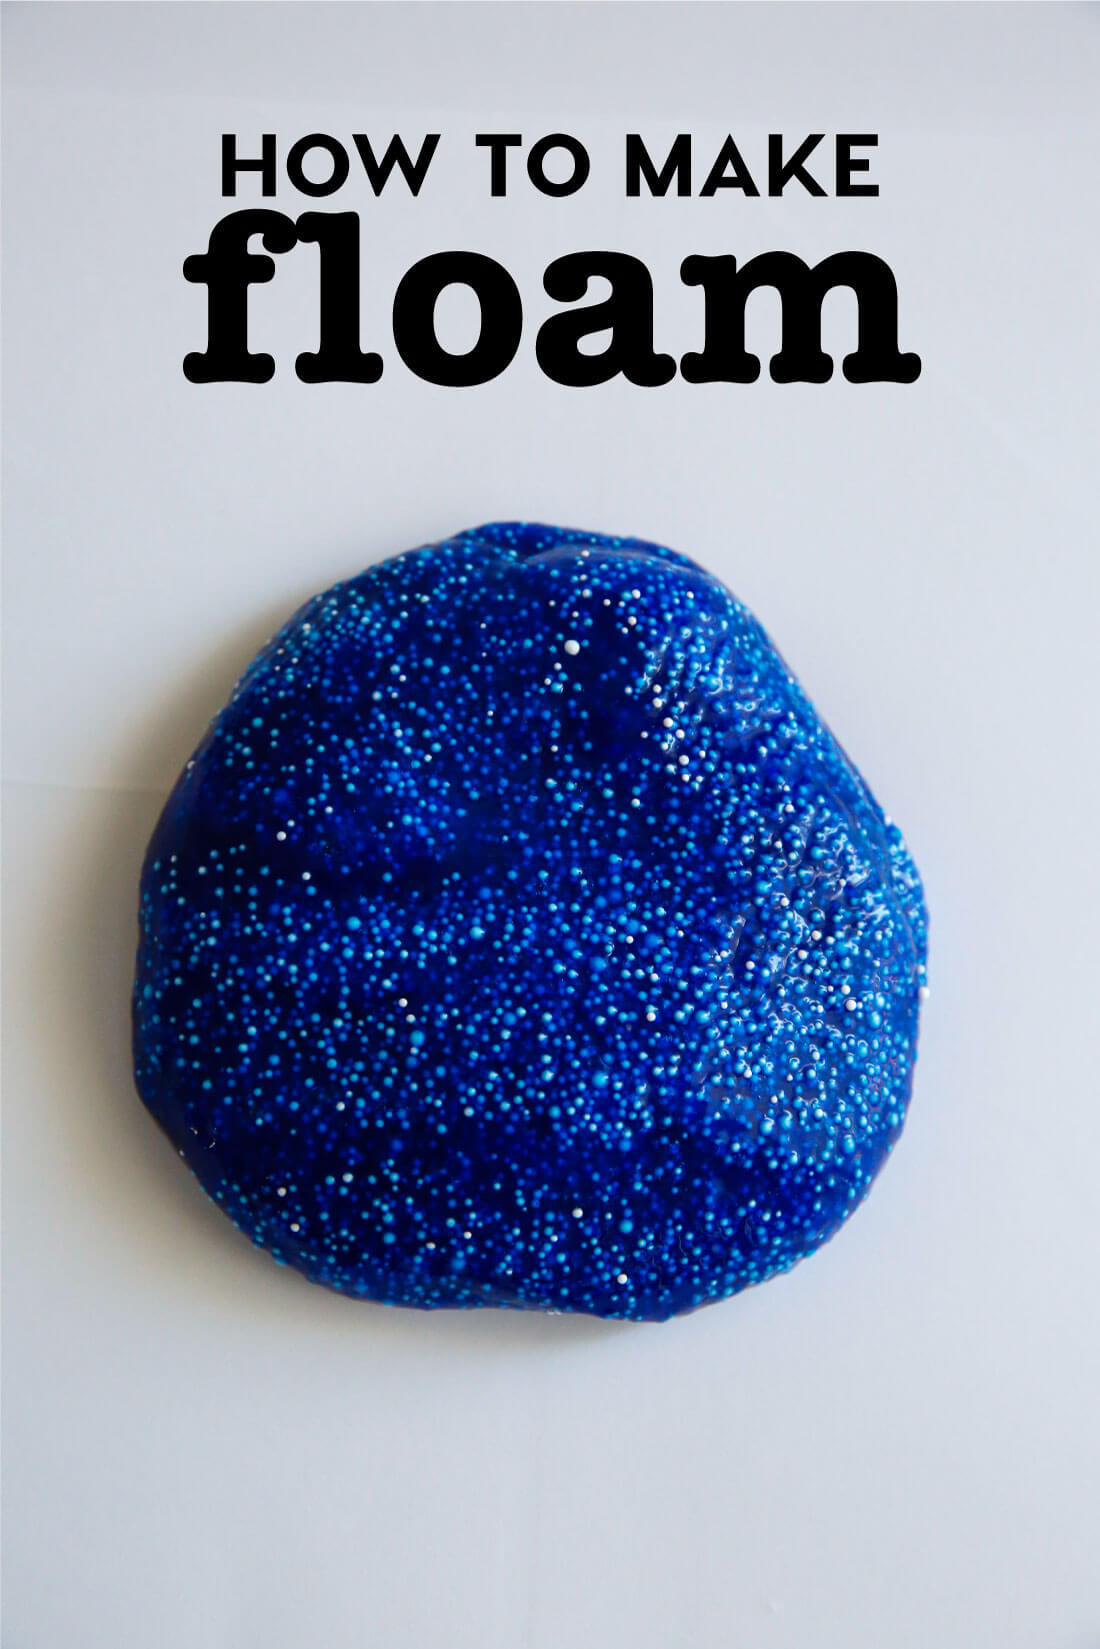 How to make floam - a floam recipe to try out for a fun kids activity! from www.thirtyhandmadedays.com